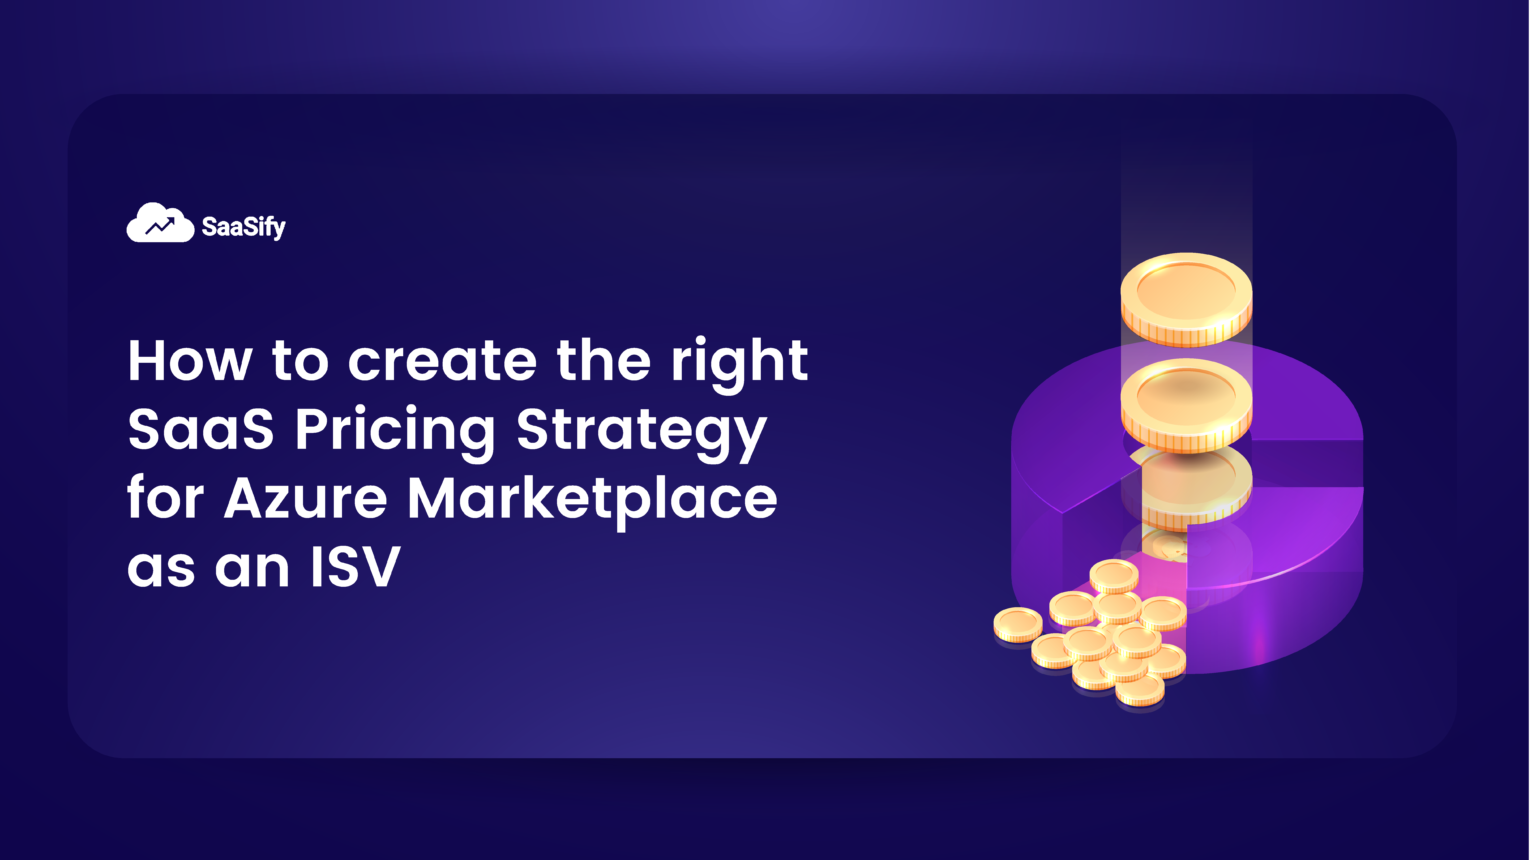 How to create the right SaaS Pricing Strategy for Azure Marketplace as an ISV